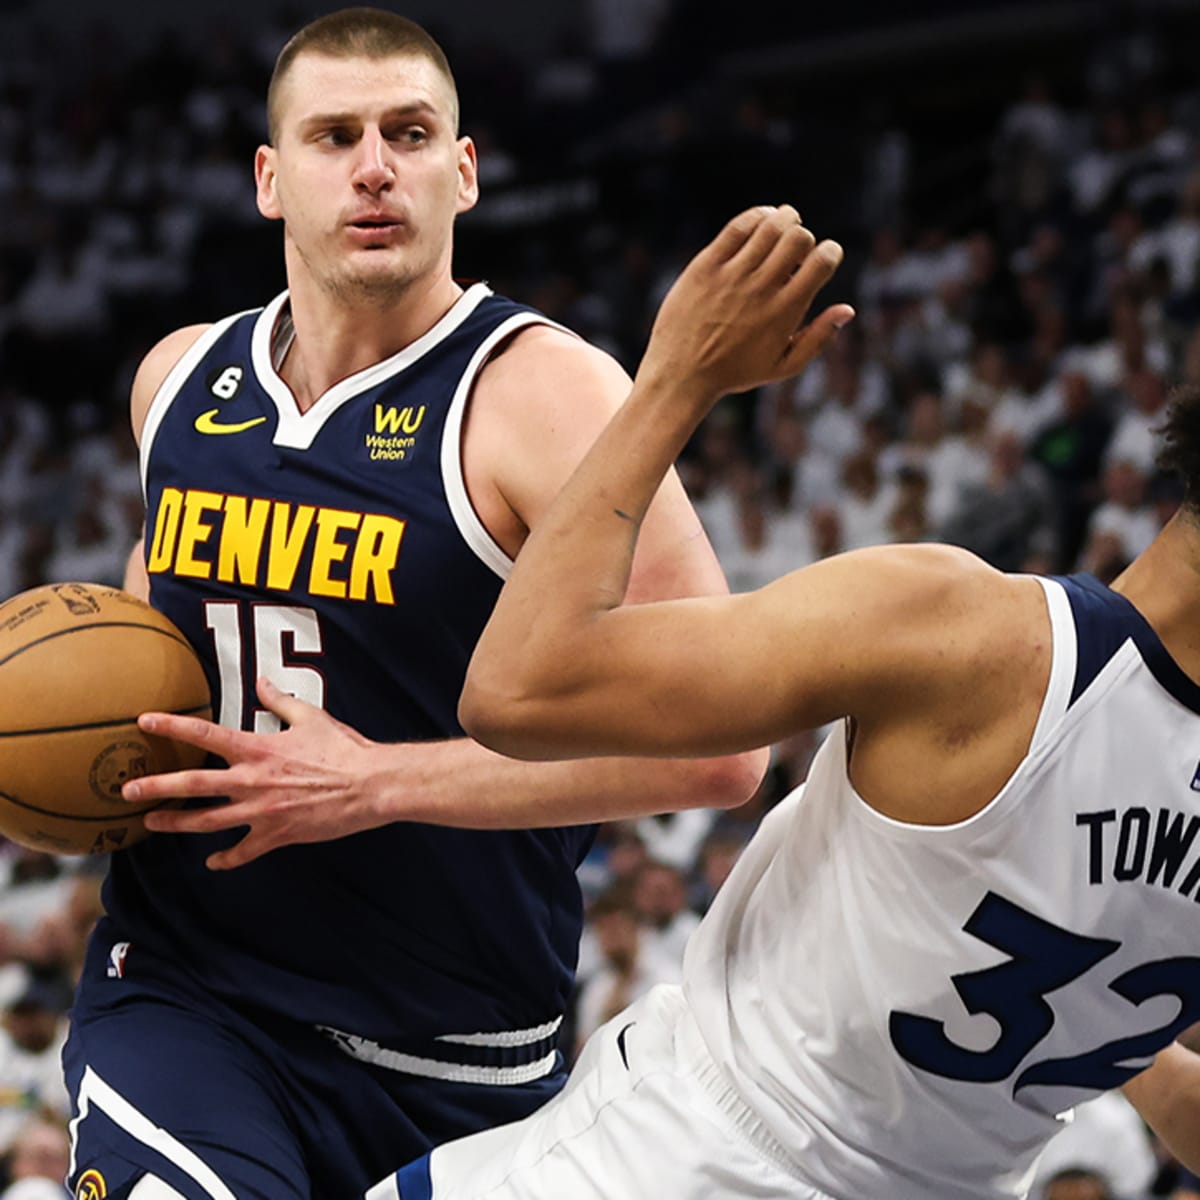 Indiana Pacers preview: Predictions and analysis for the 2022-23 NBA season  - The Athletic